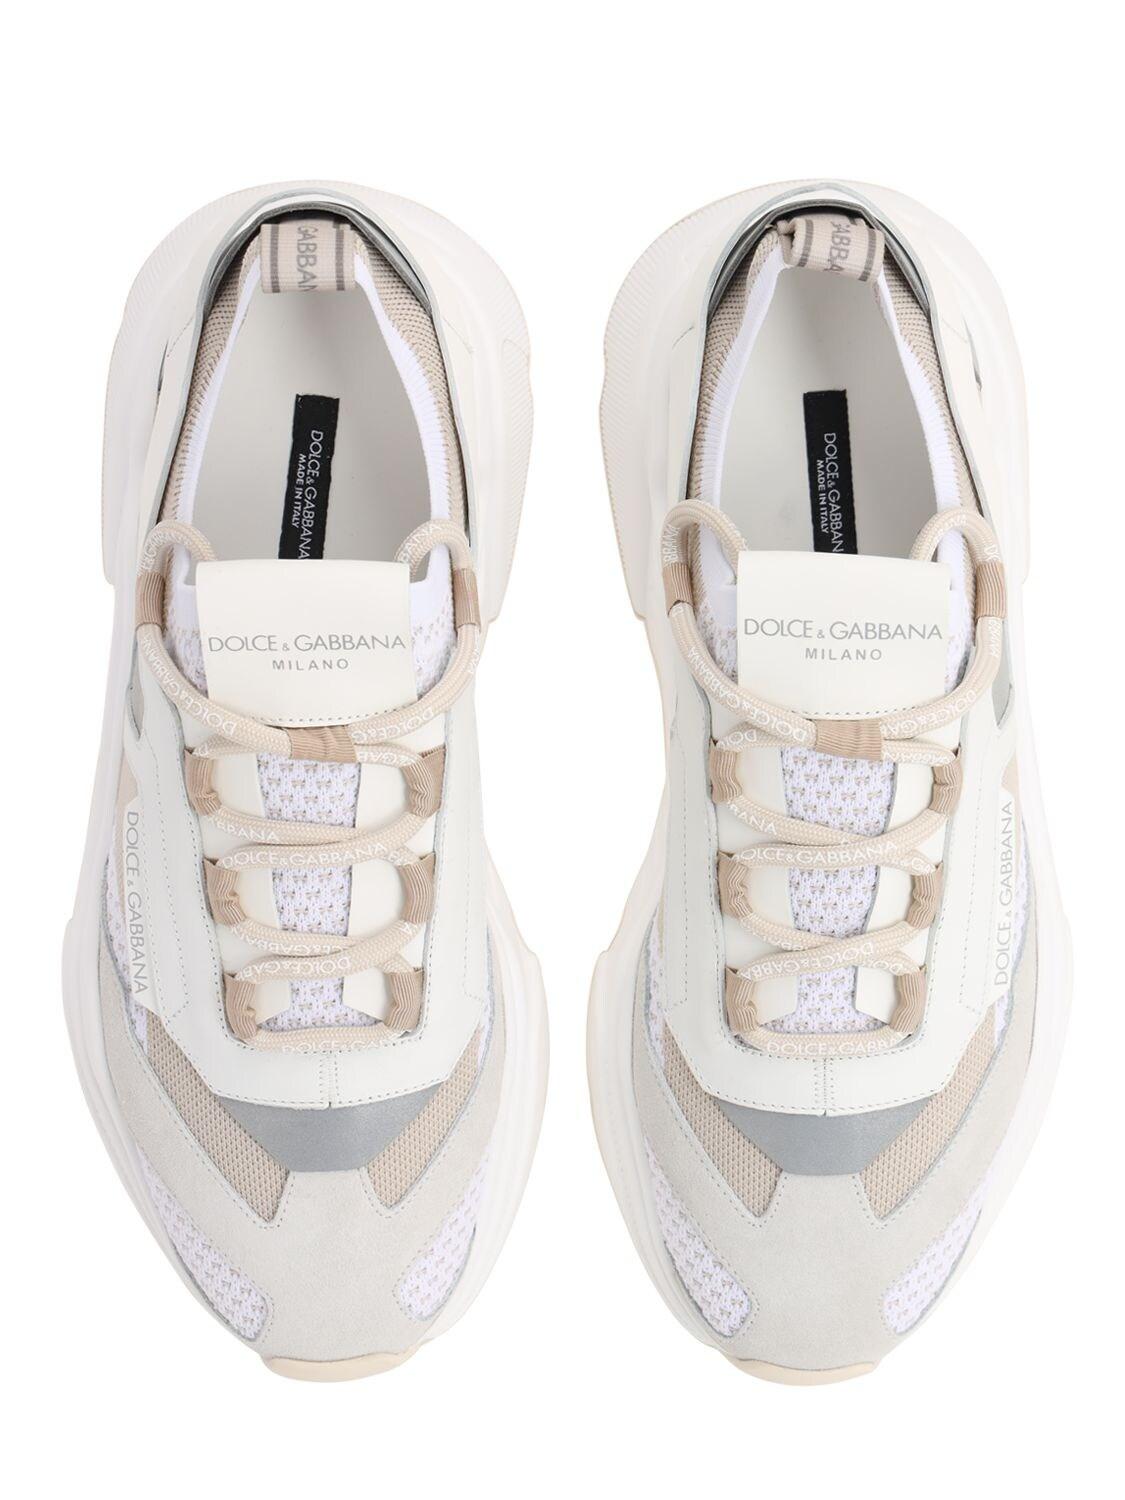 Dolce & Gabbana Day Master Mesh & Leather Sneakers in White for Men - Lyst